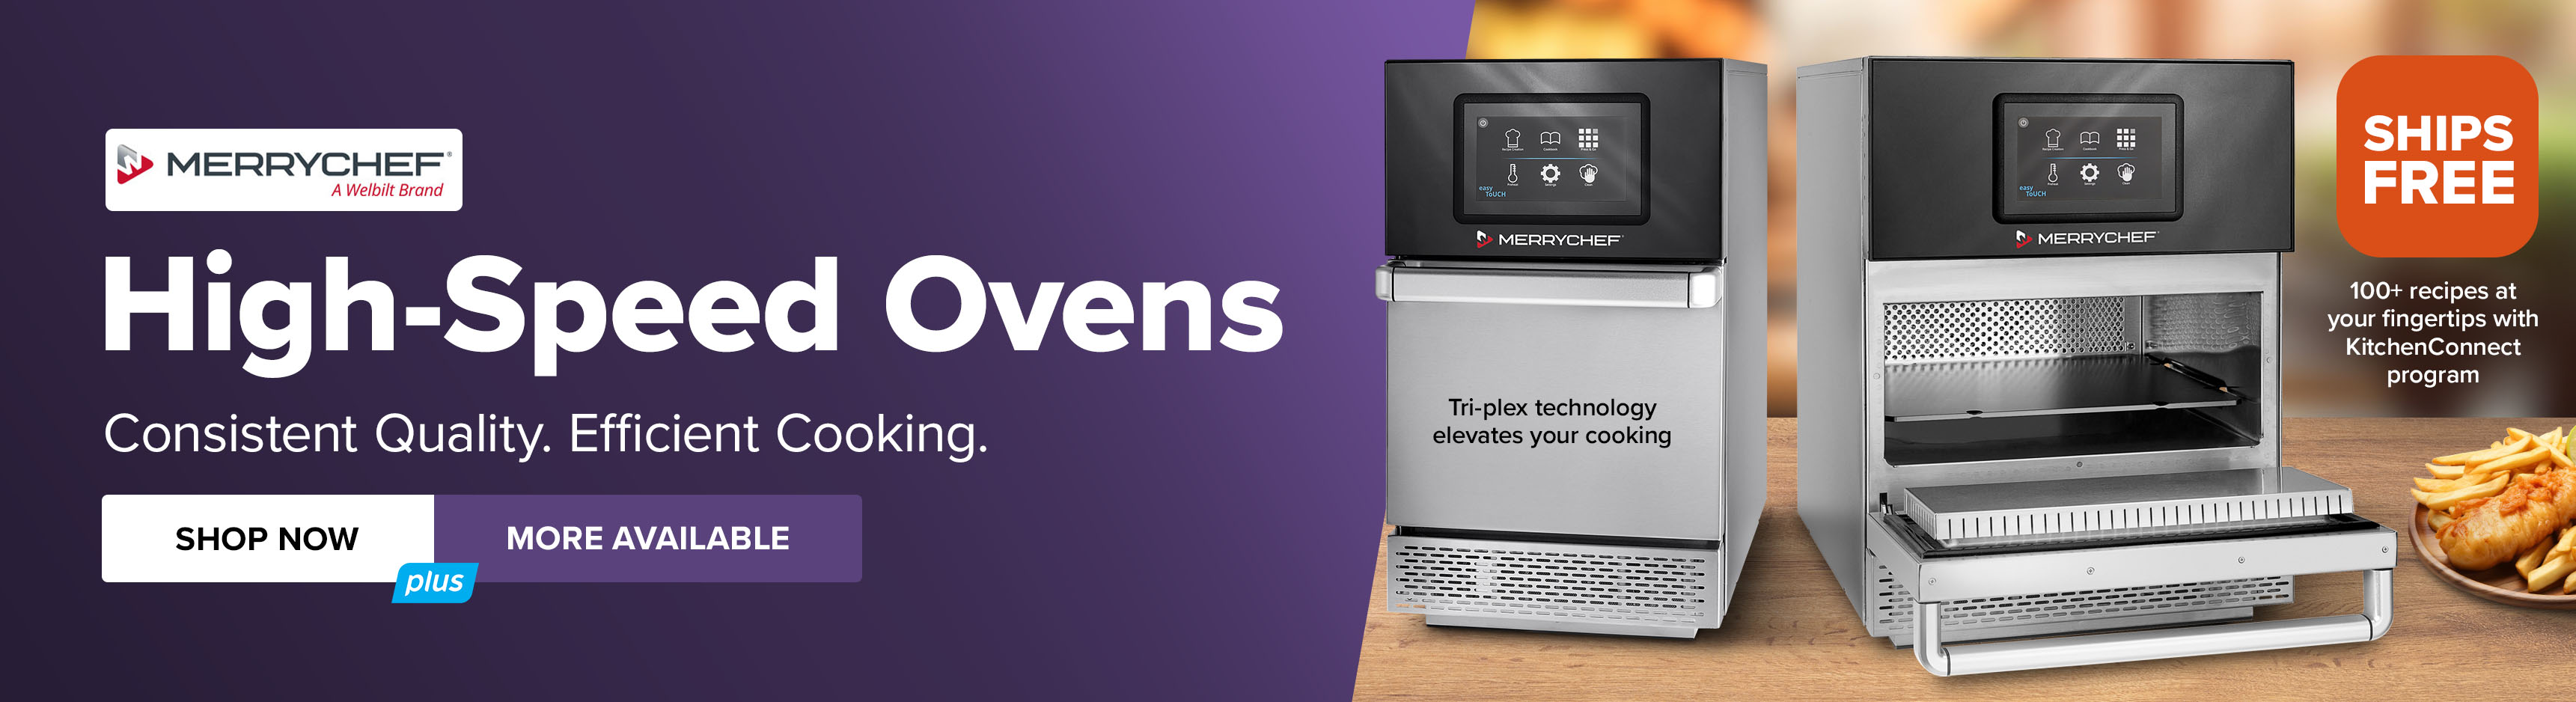 MerryChef High Speed Ovens. Consistent Quality. Efficient Cooking. Shop Now